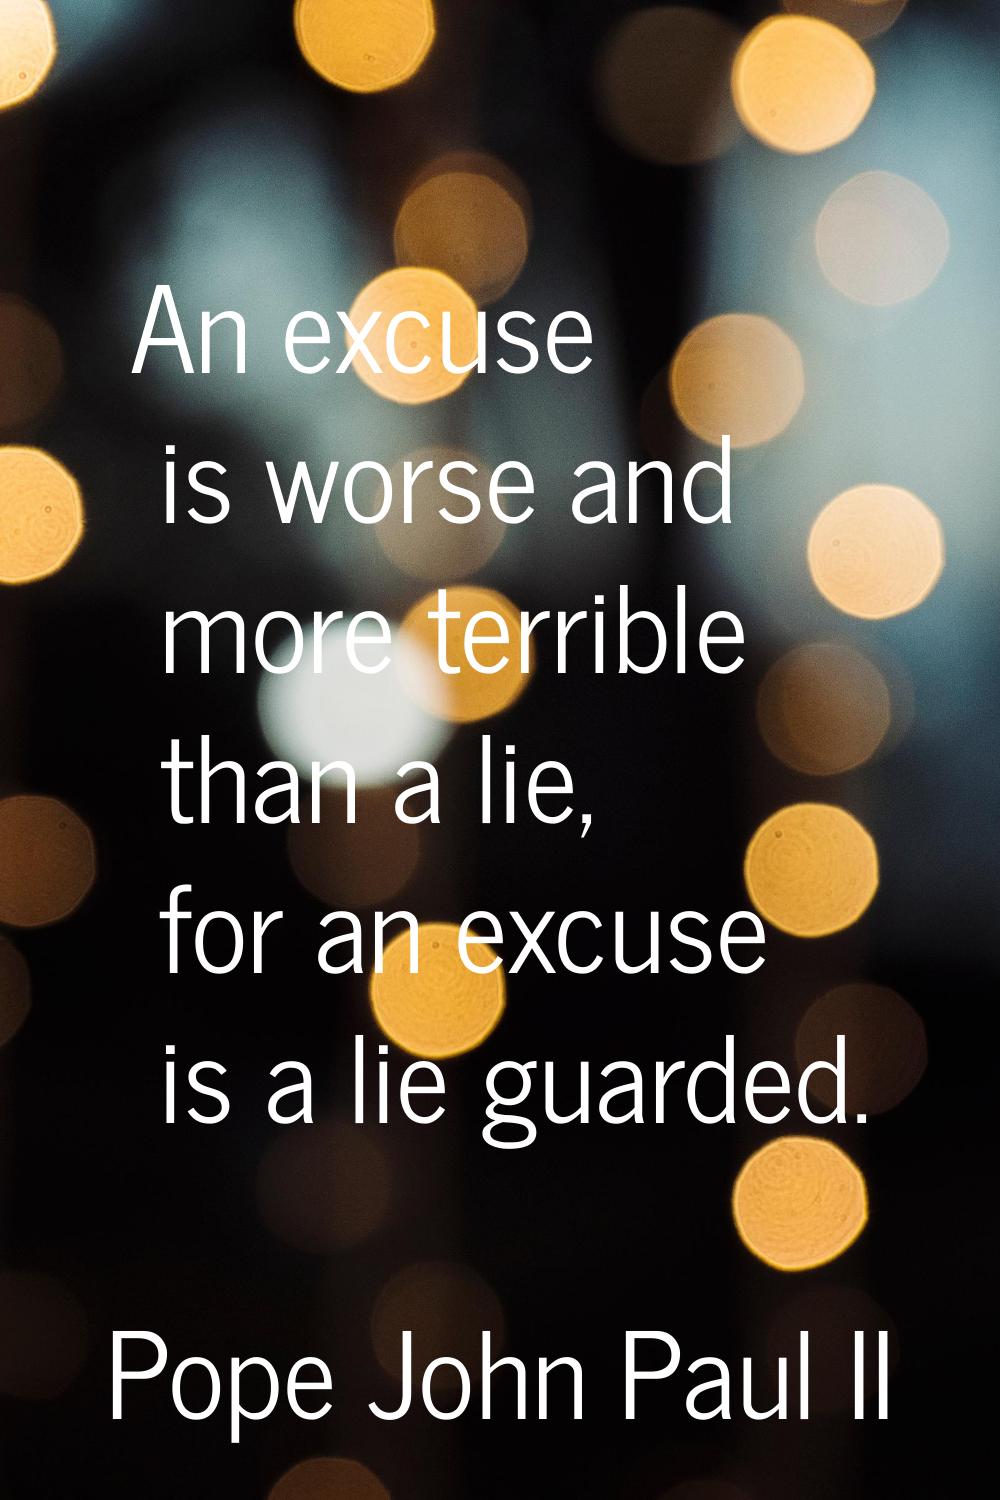 An excuse is worse and more terrible than a lie, for an excuse is a lie guarded.